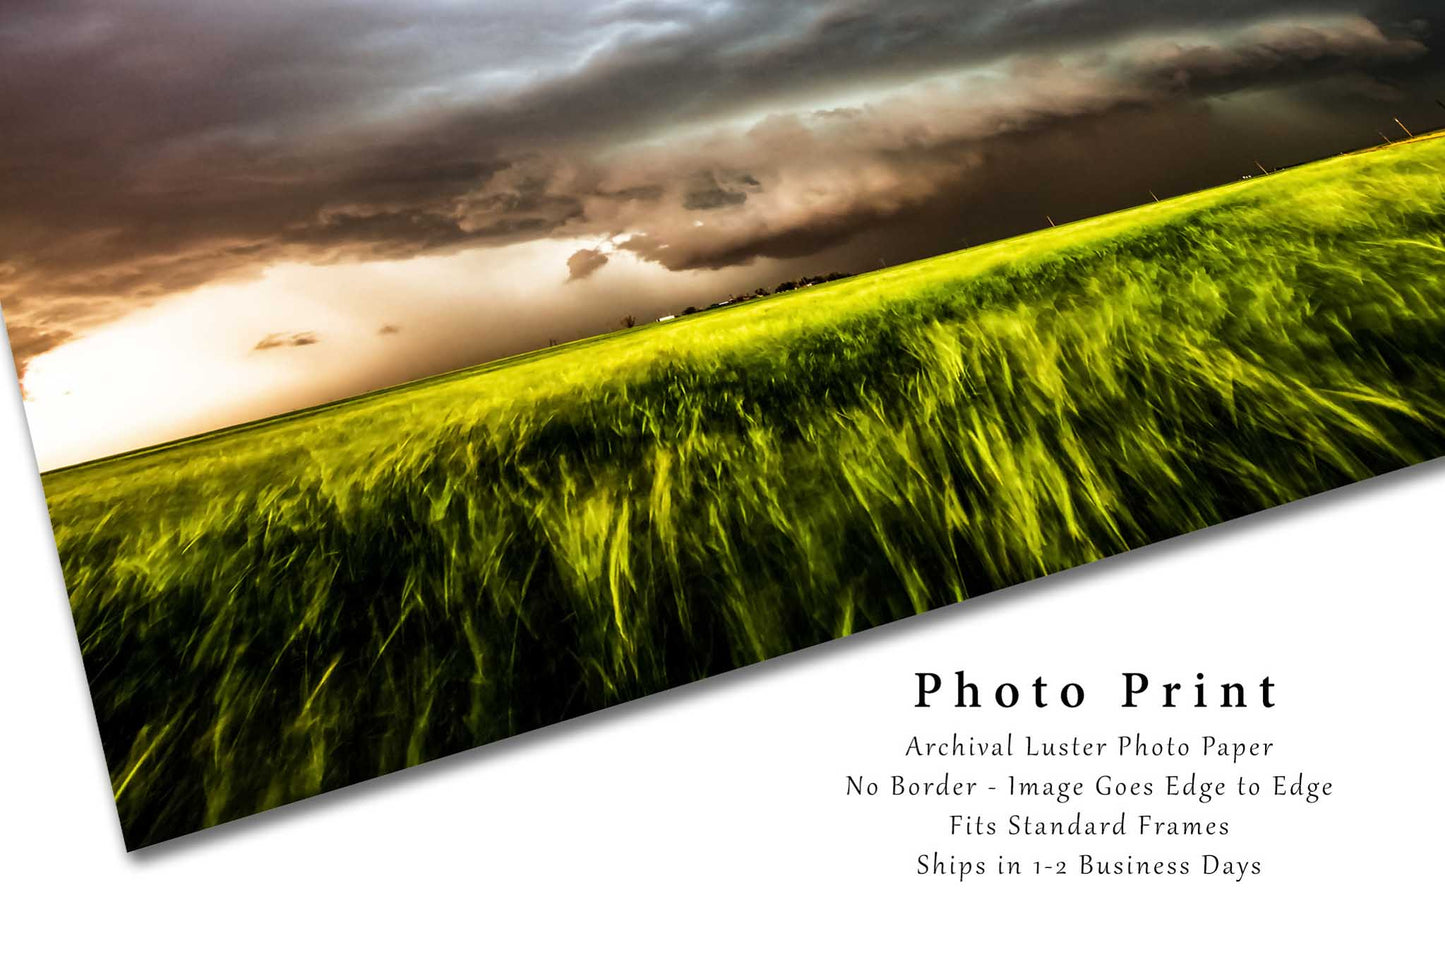 Storm Photography Print - Picture of Powerful Thunderstorm Pulling Wheat Toward It in Southwest Oklahoma Weather Artwork Home Decor